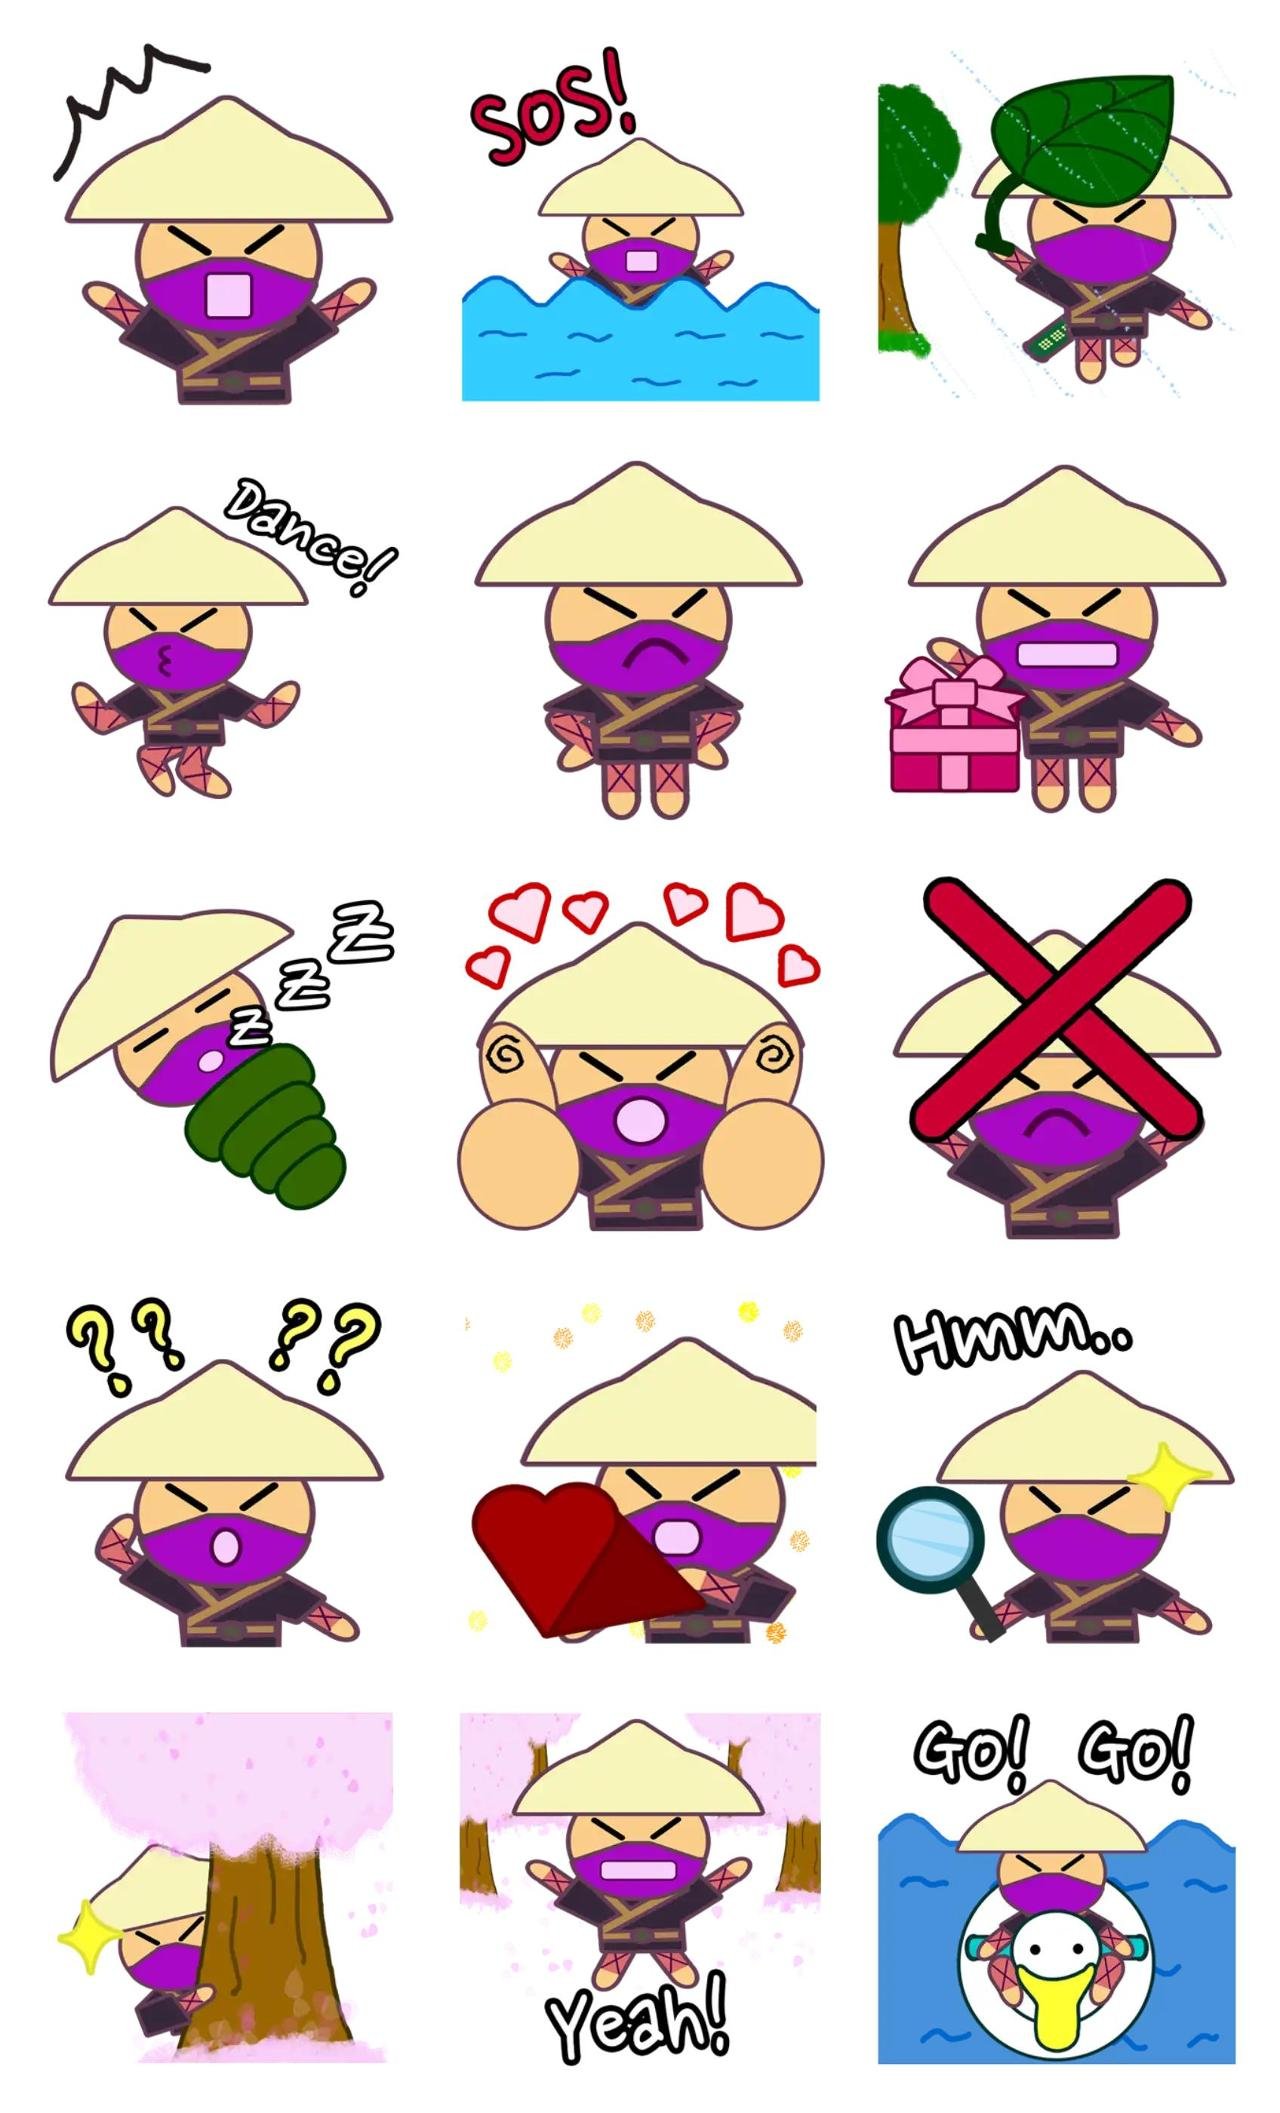 Life of Ninja Gag,People sticker pack for Whatsapp, Telegram, Signal, and others chatting and message apps